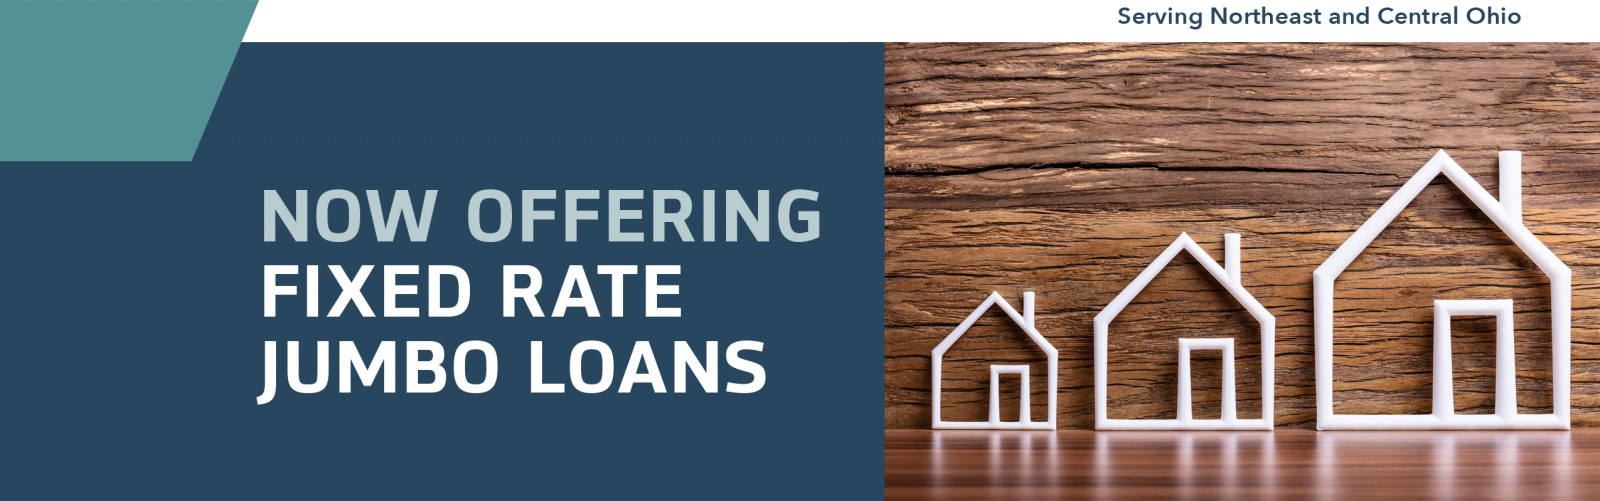 Now Offering Fixed Rate Jumbo Loans Serving Northeast, Central and Western Ohio